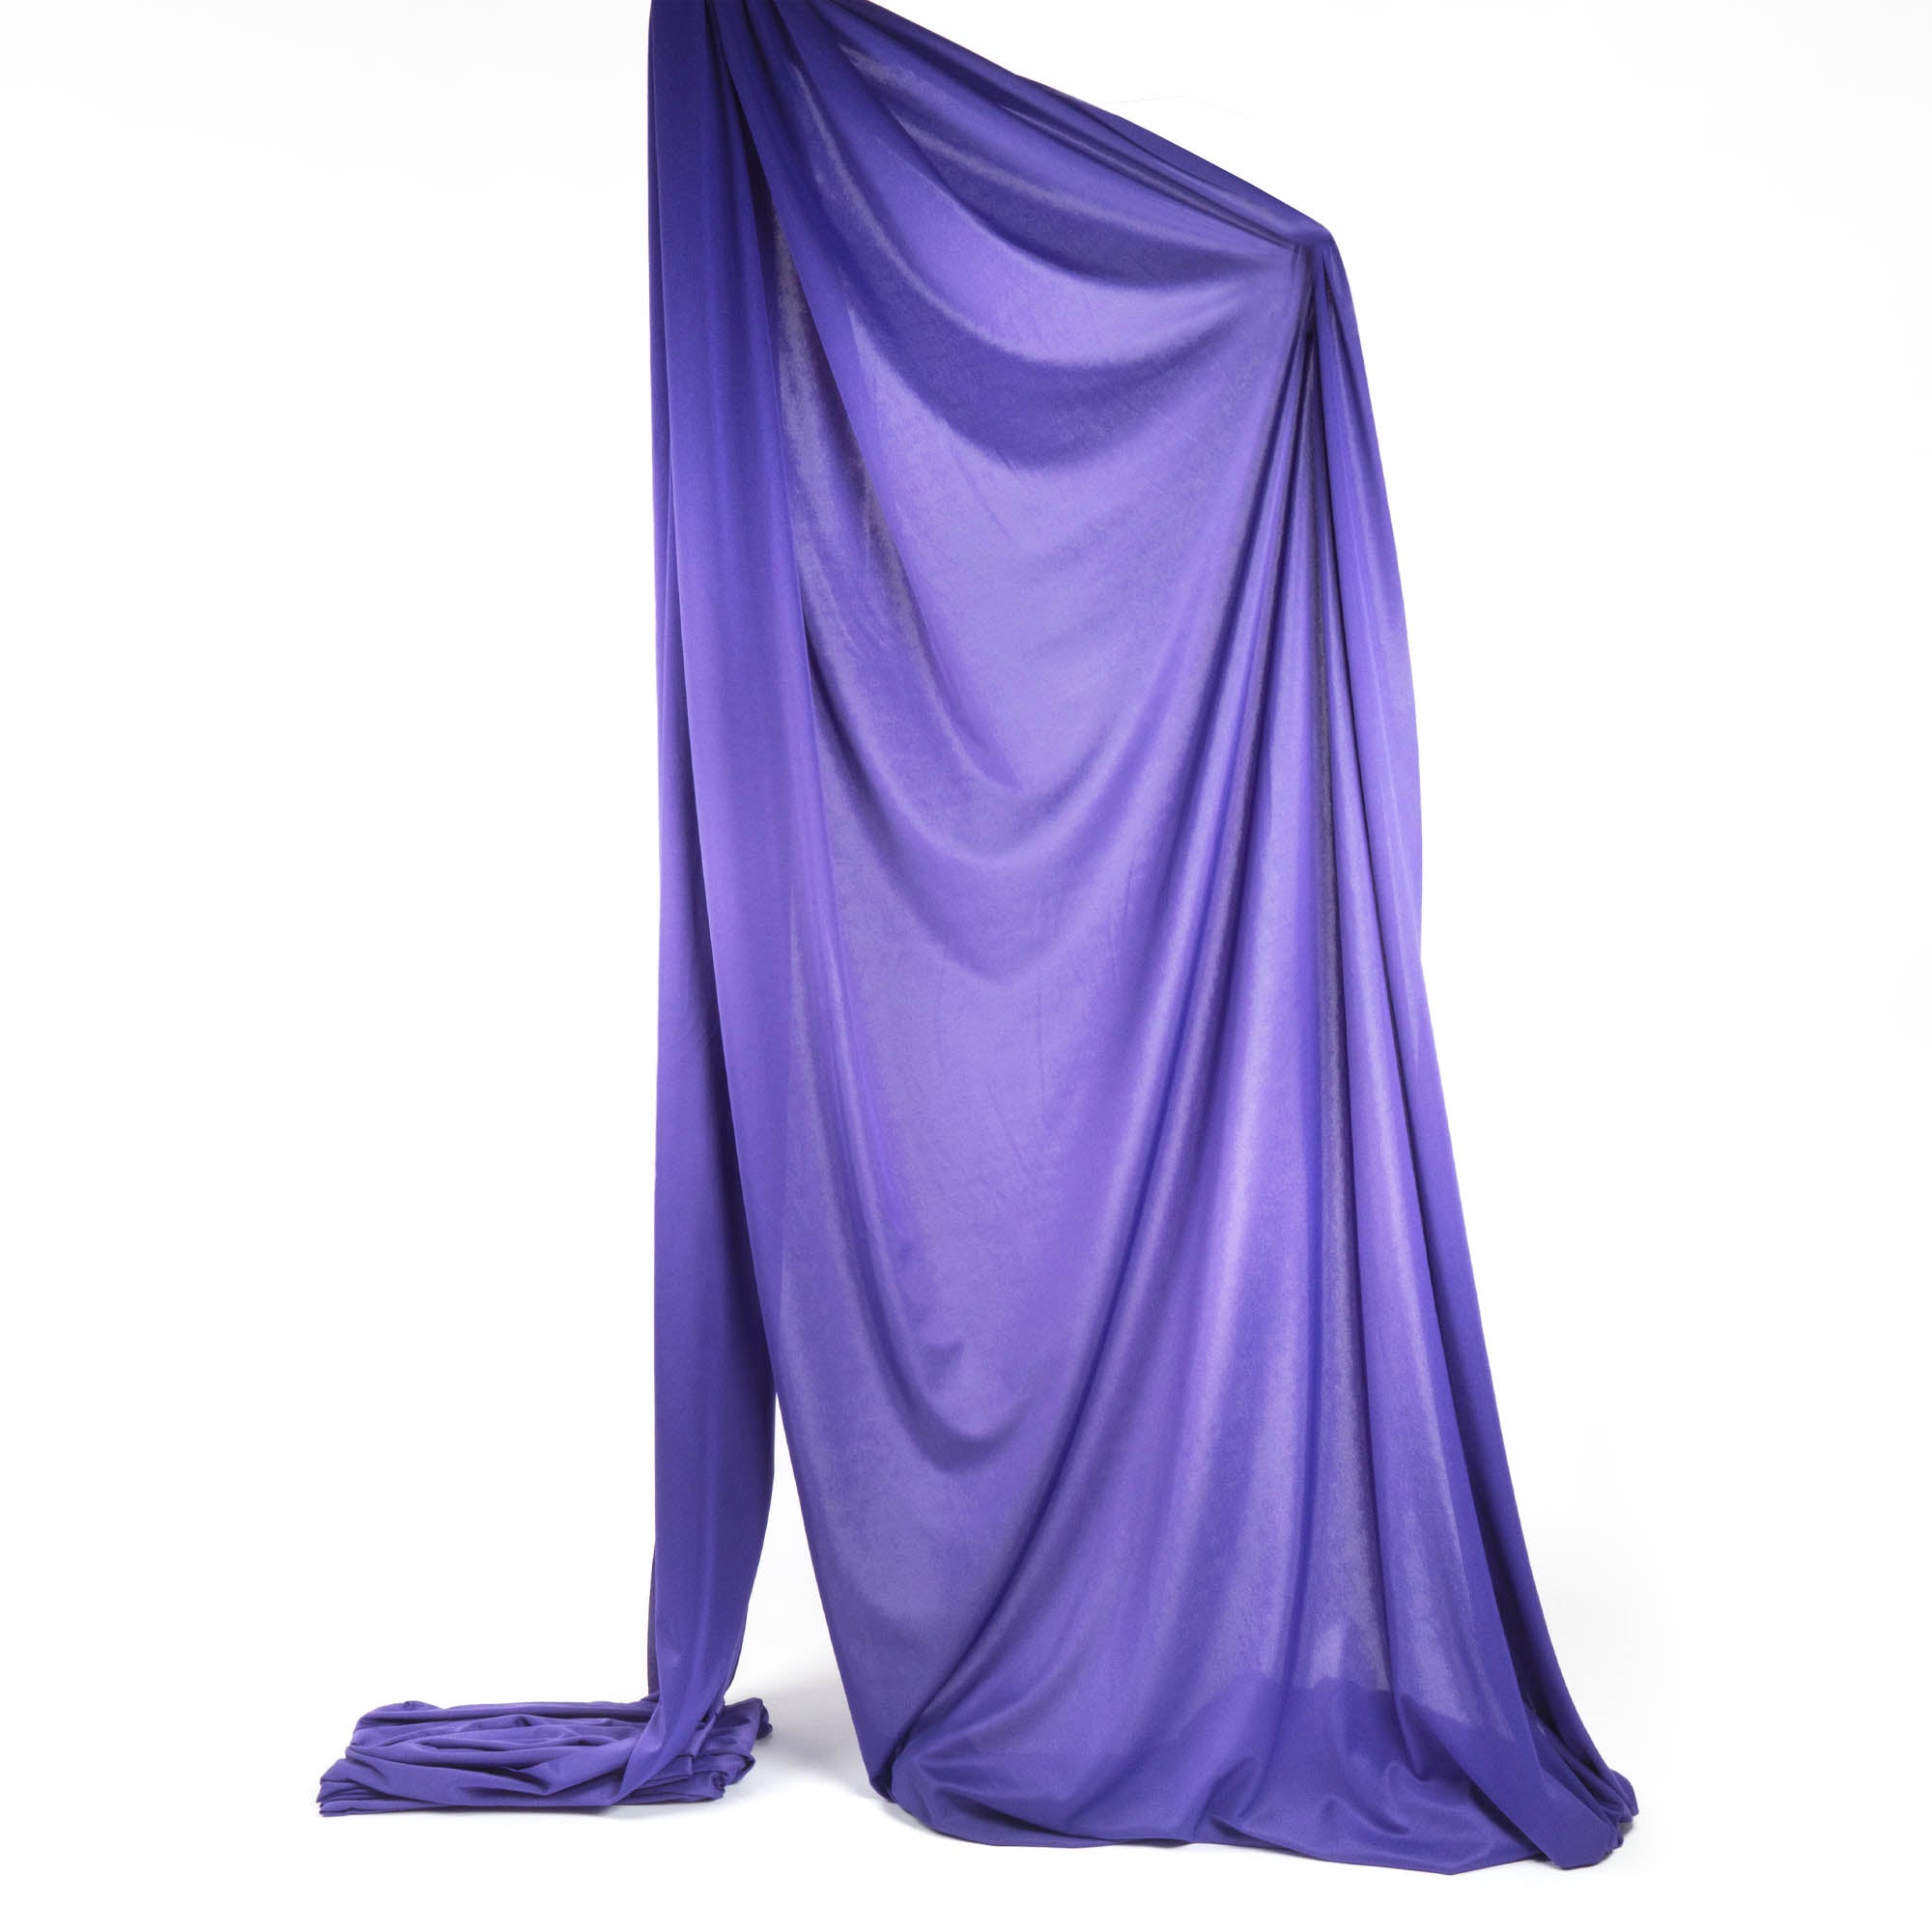 Firetoys youth aerial silk in purple rigged